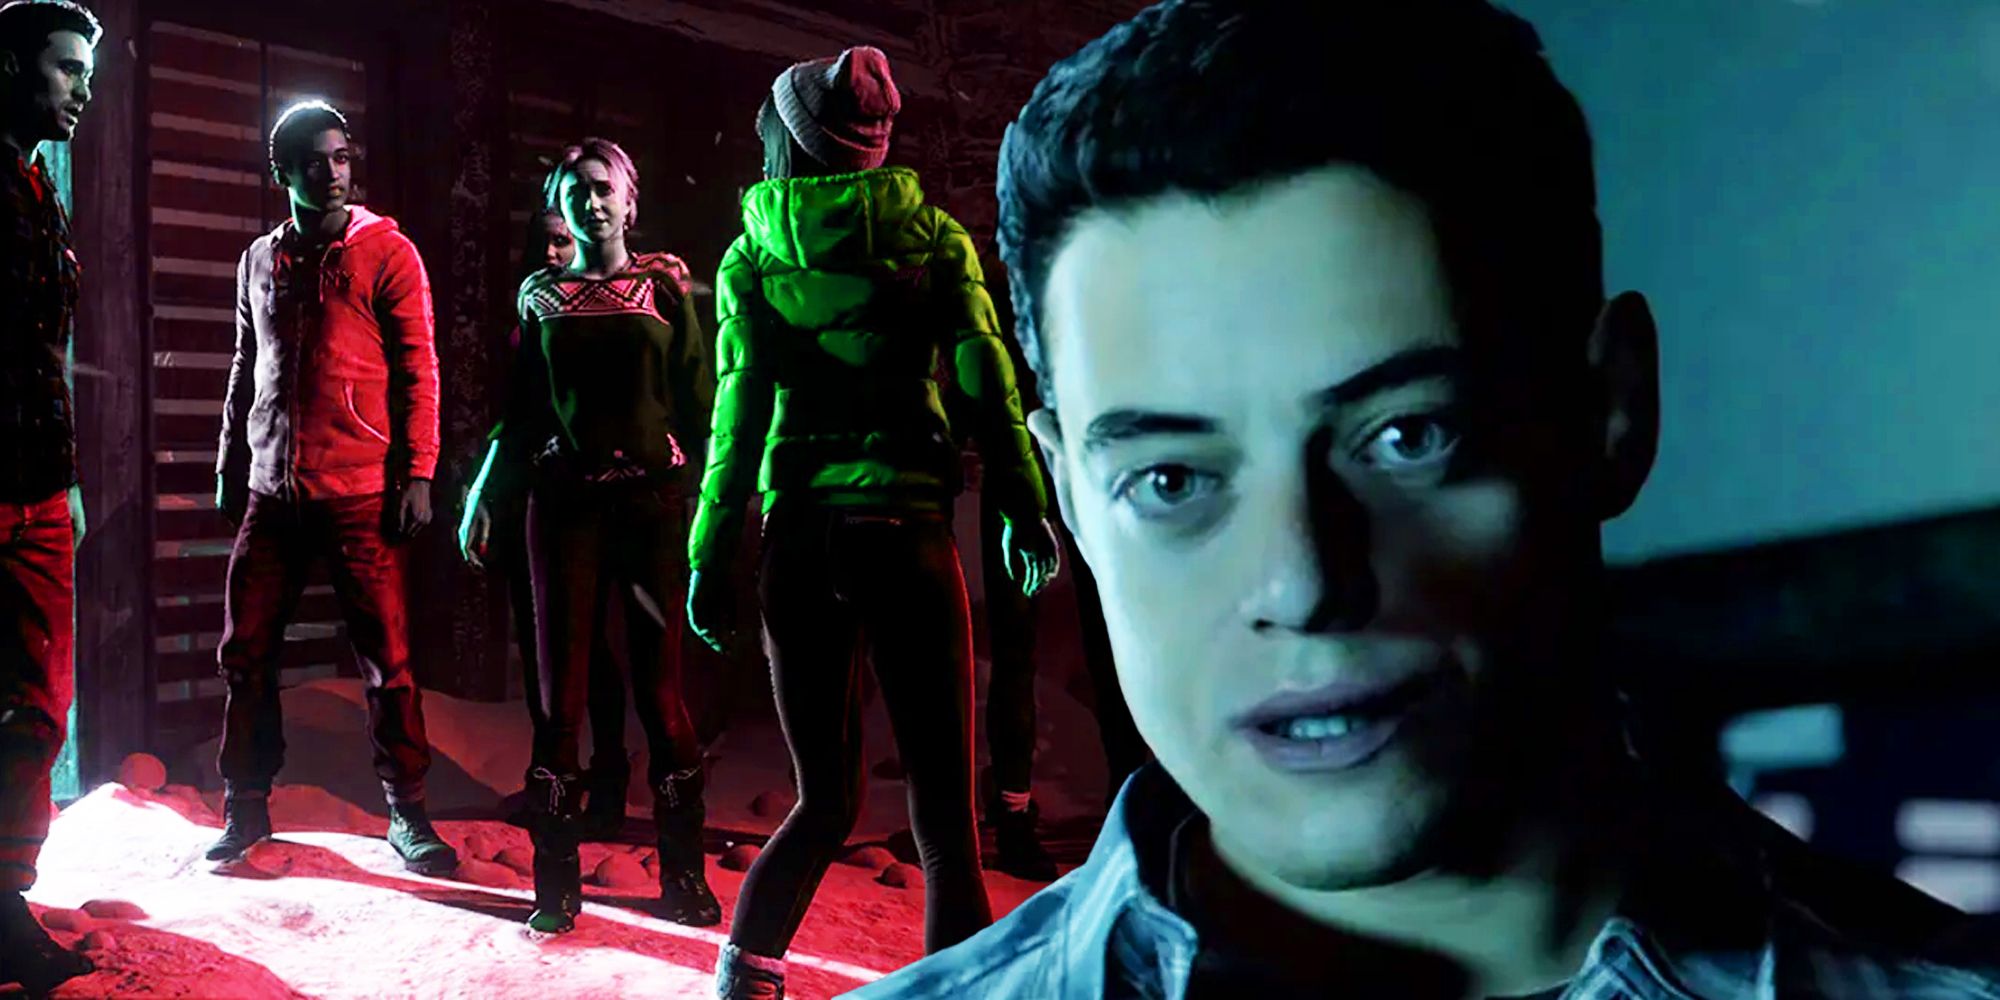 Rami Malek and the cast of Until Dawn